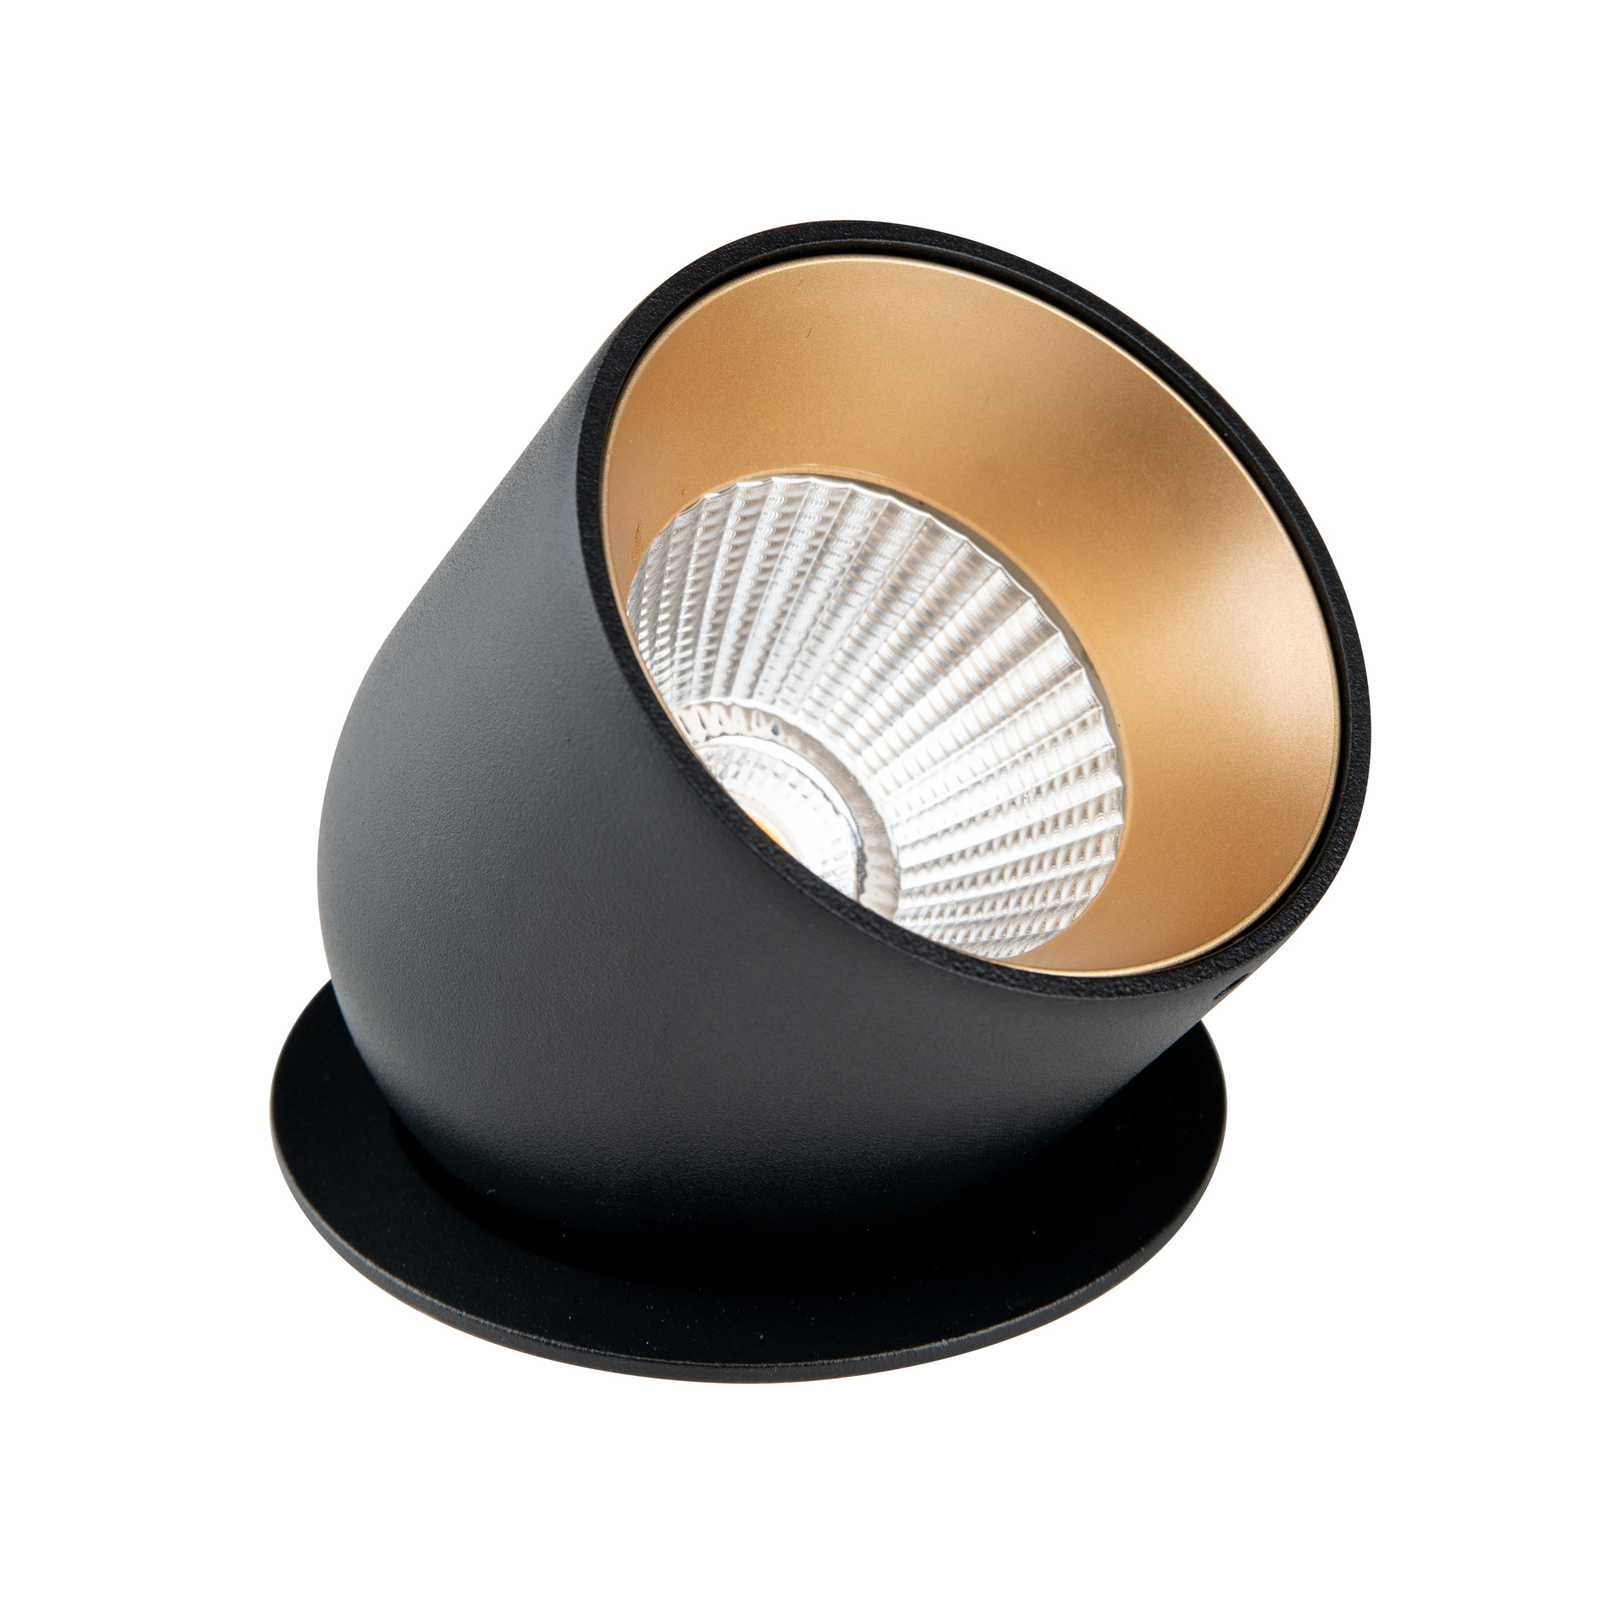 SLC Innenring Cup for downlight Cup, gold